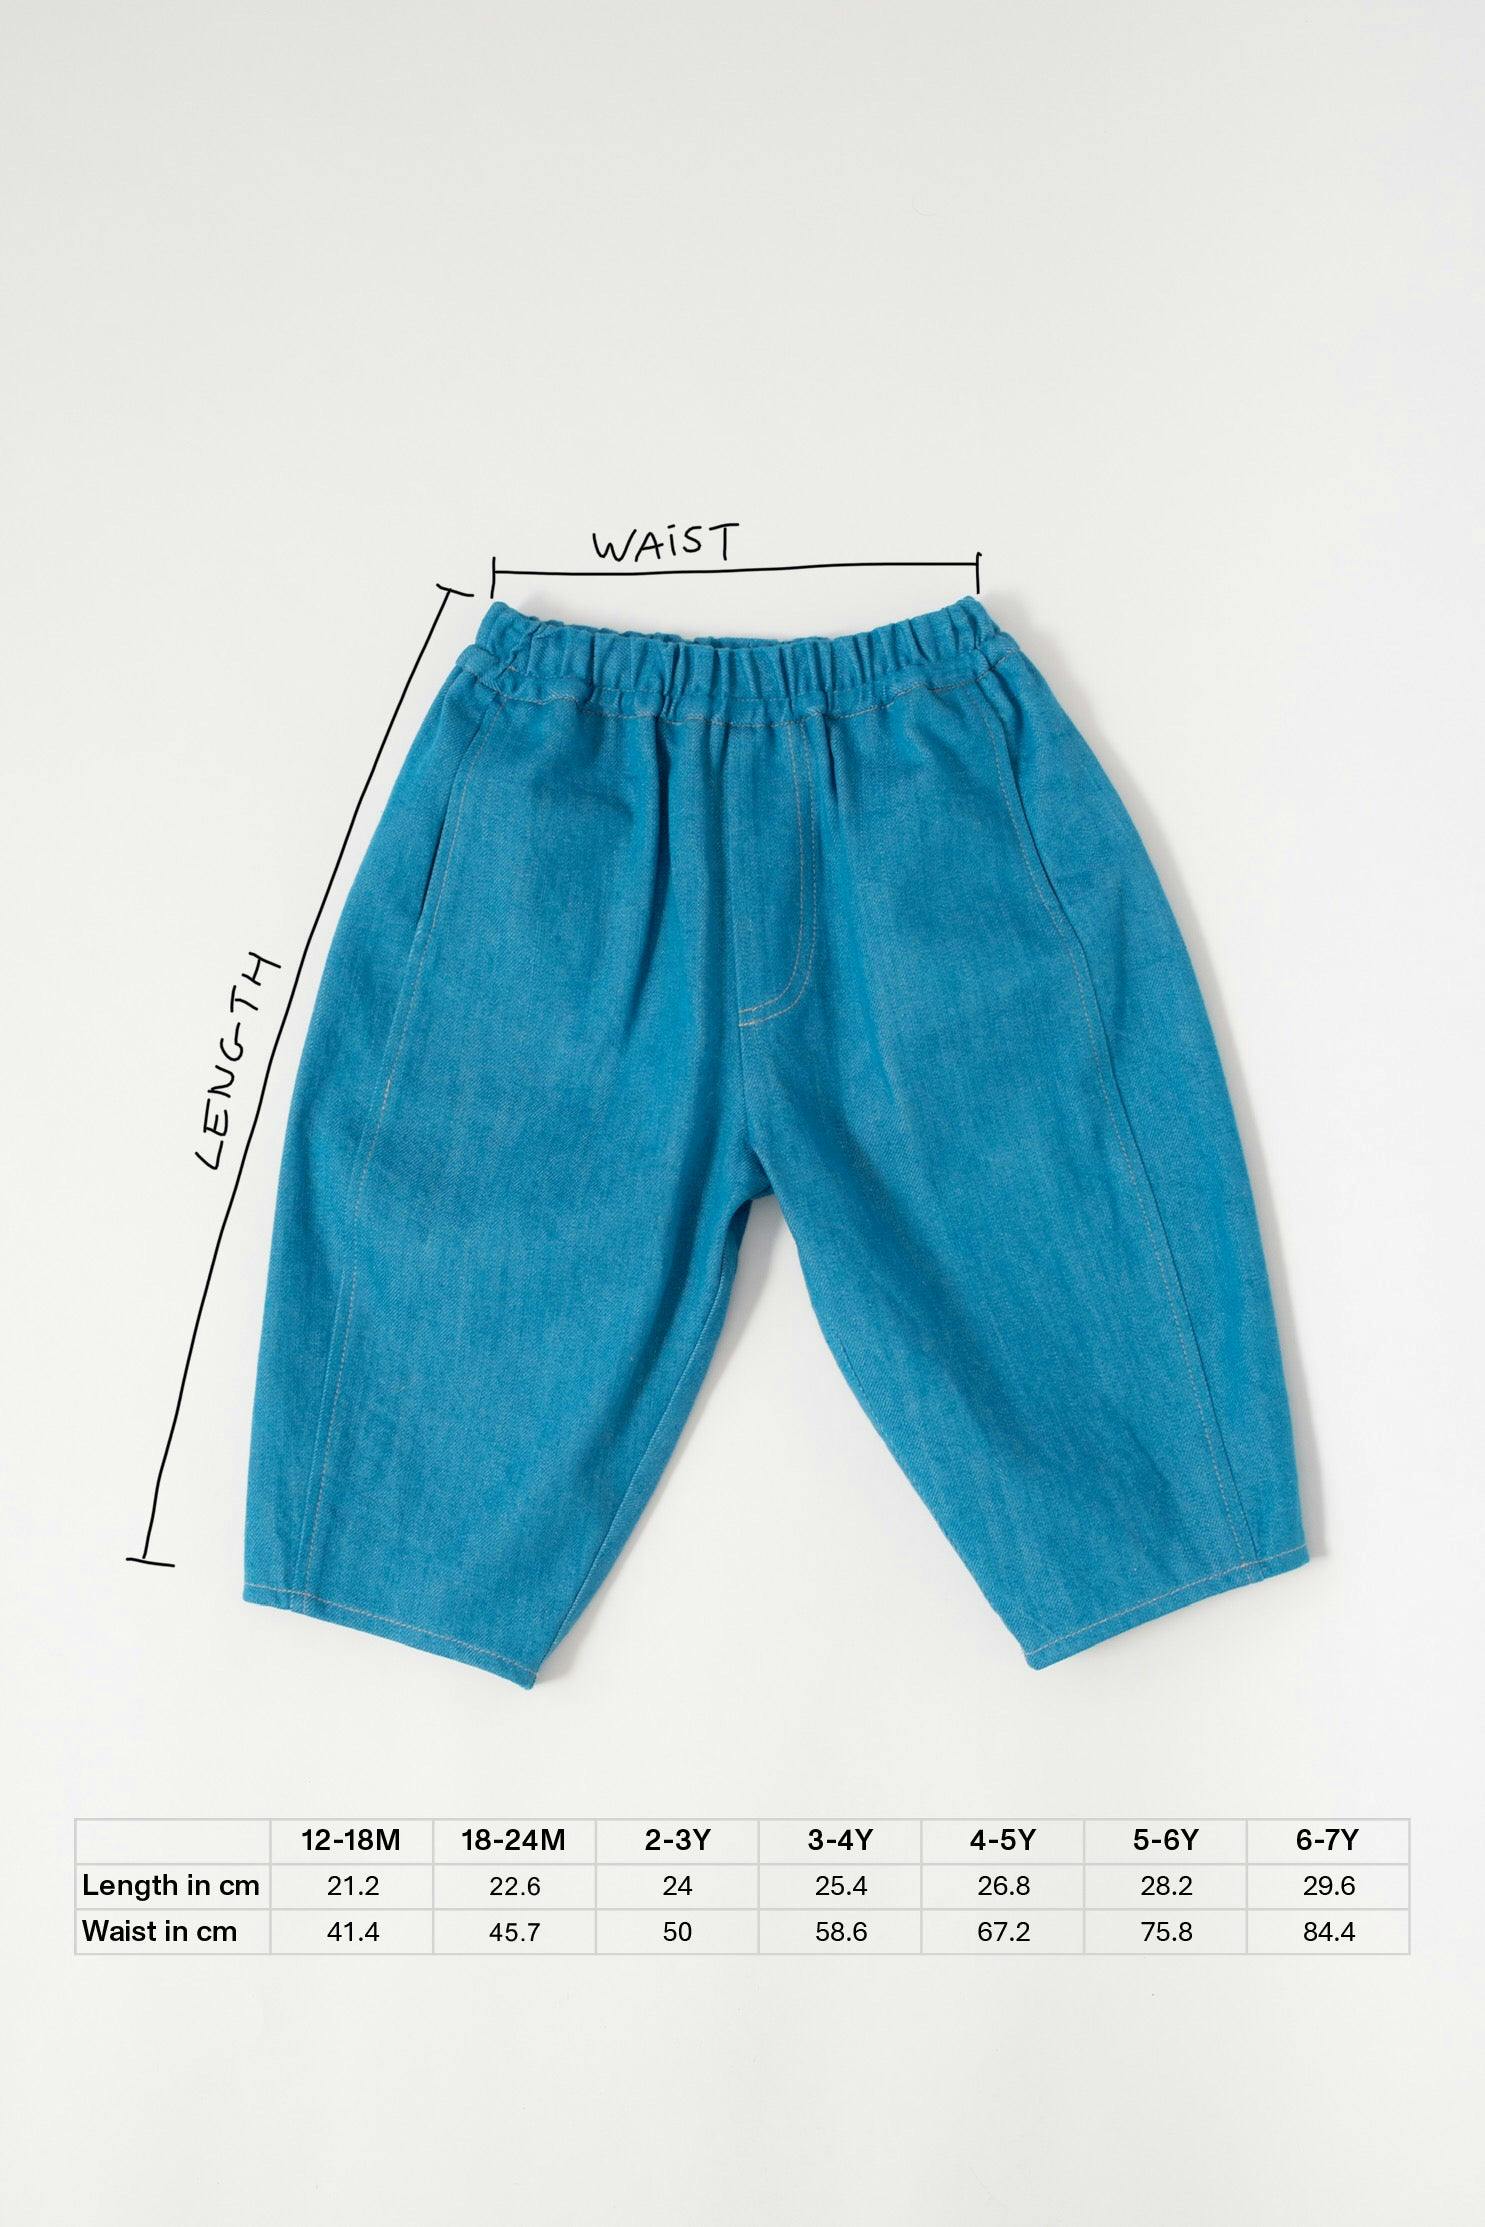 measurements for kids sizing denim trousers